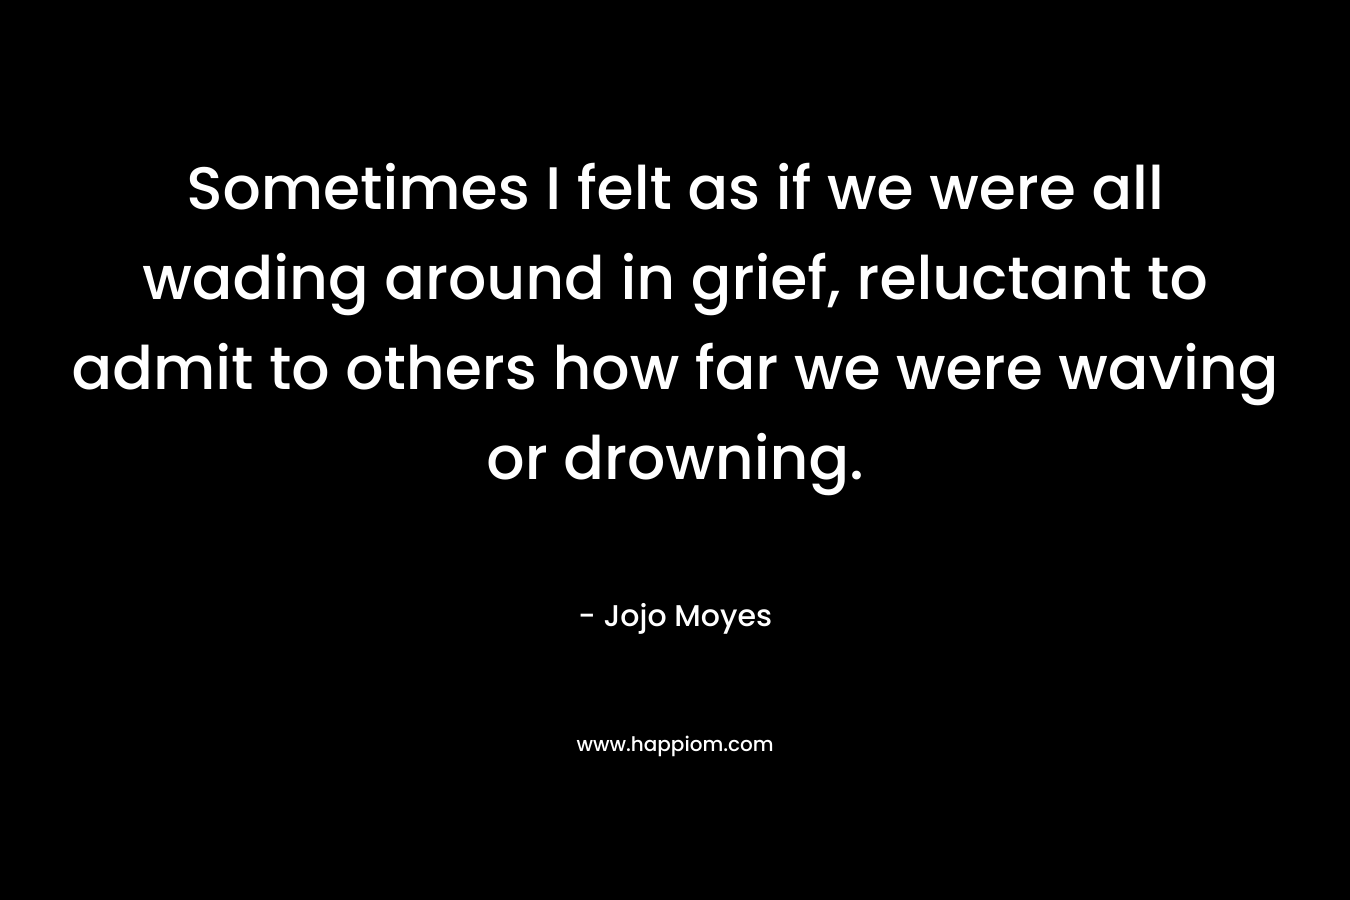 Sometimes I felt as if we were all wading around in grief, reluctant to admit to others how far we were waving or drowning.